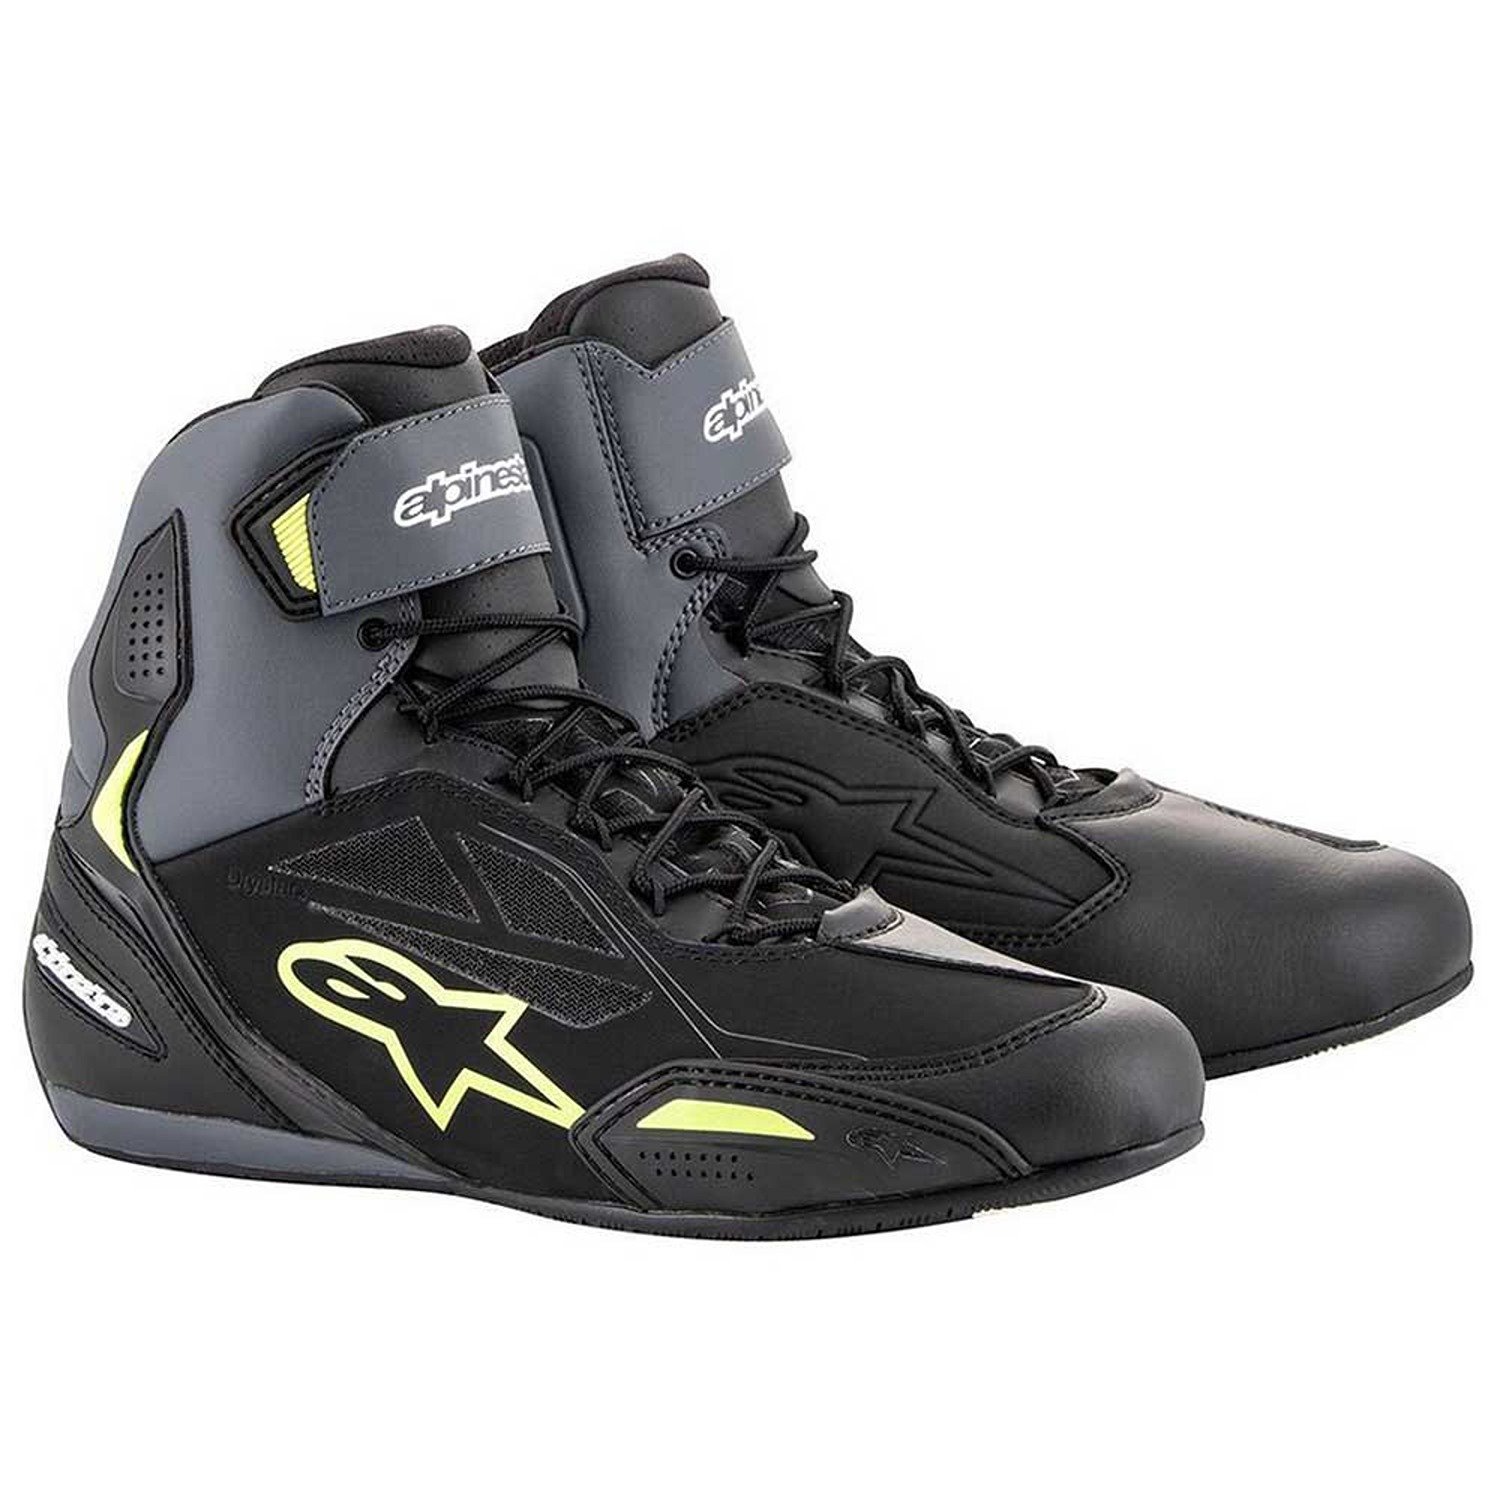 Image of Alpinestars Faster-3 Shoes Black Yellow Fluo Size US 13 ID 8059347331164